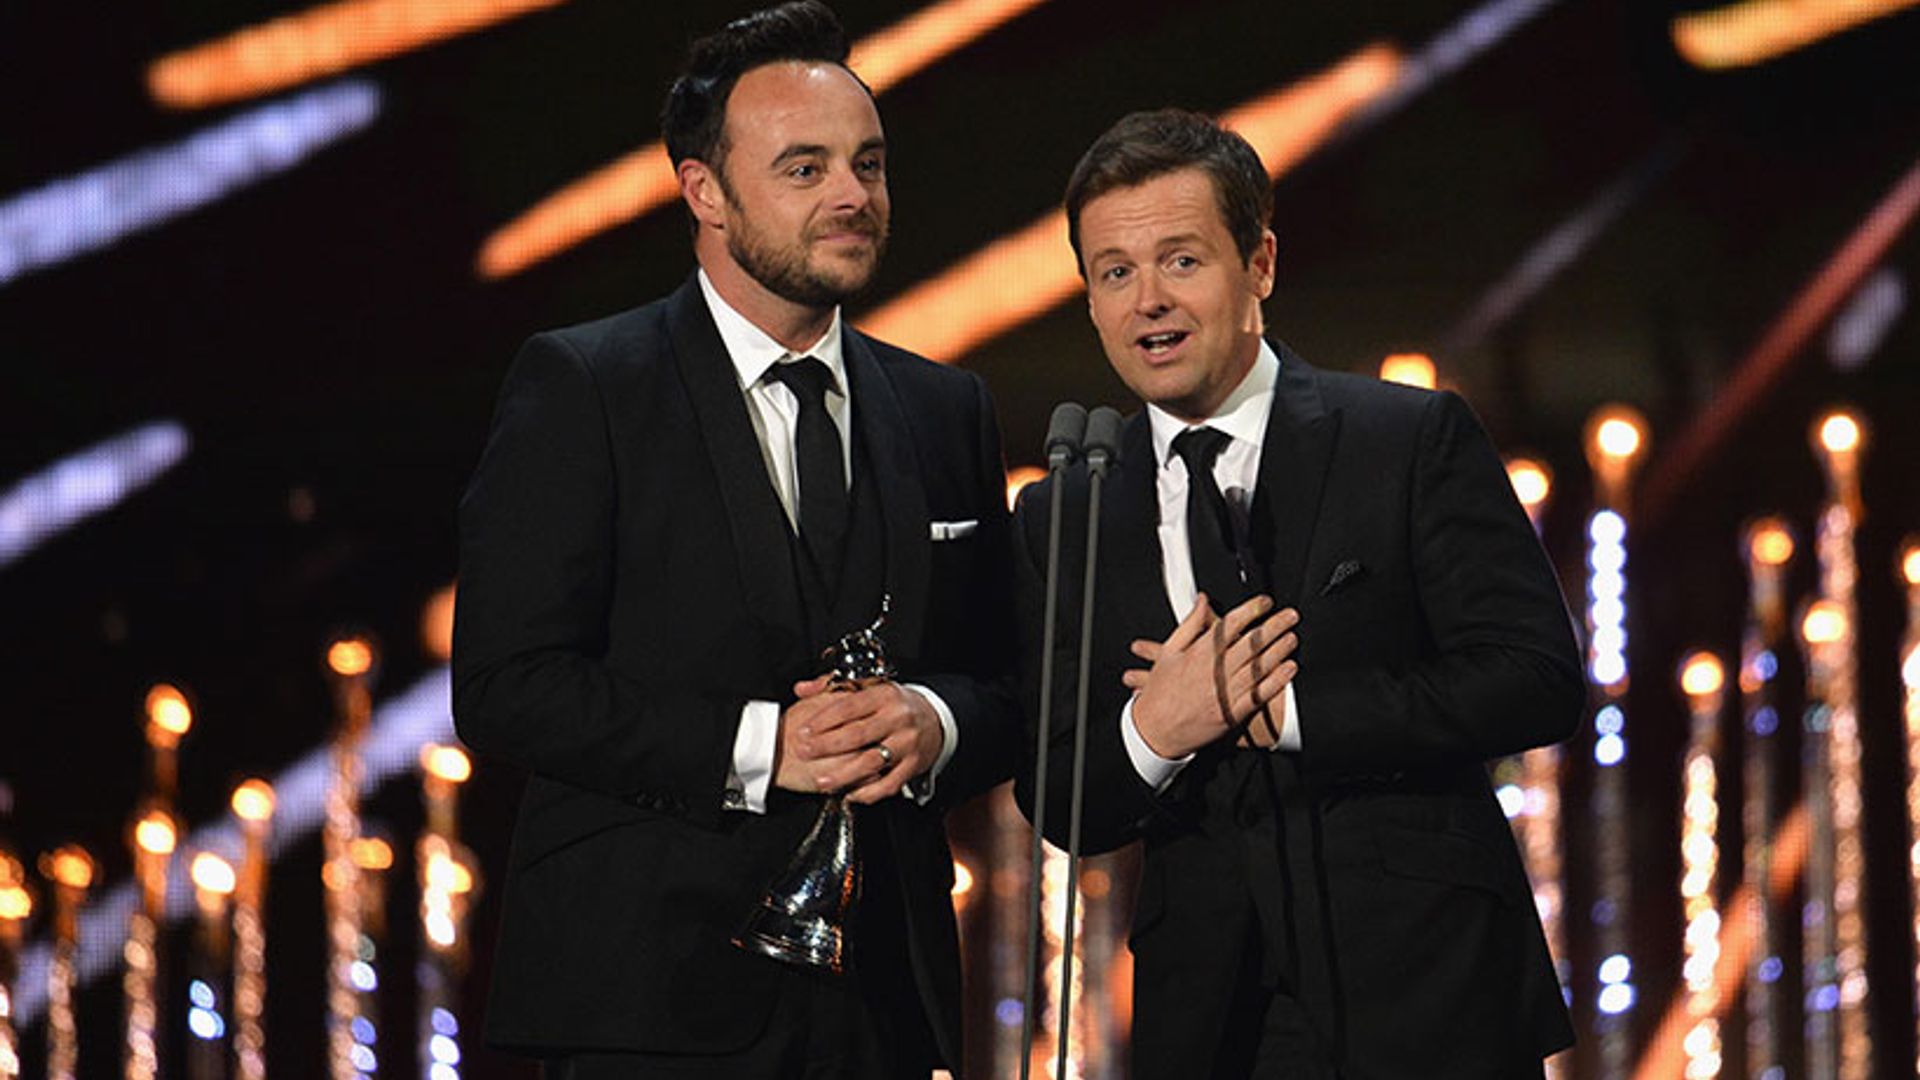 Ant and Dec nominated for BAFTA Award